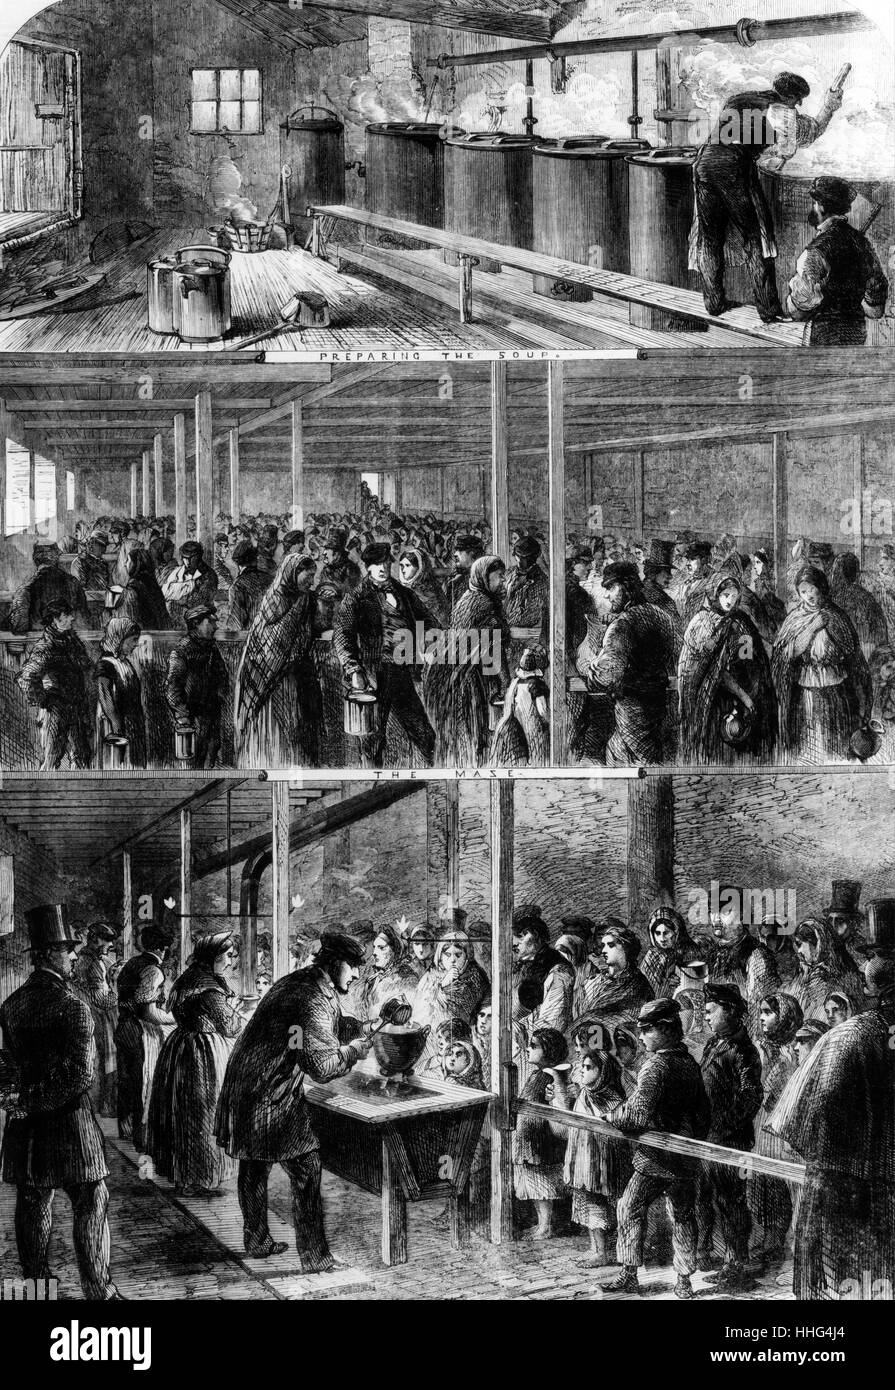 Soup kitchen in Manchester, England during the Cotton Famine (Lancashire Cotton Famine), of North West England in 1862. People are shown queuing up for rations, and water. The American Civil war was the catalyst for the famine. Stock Photo